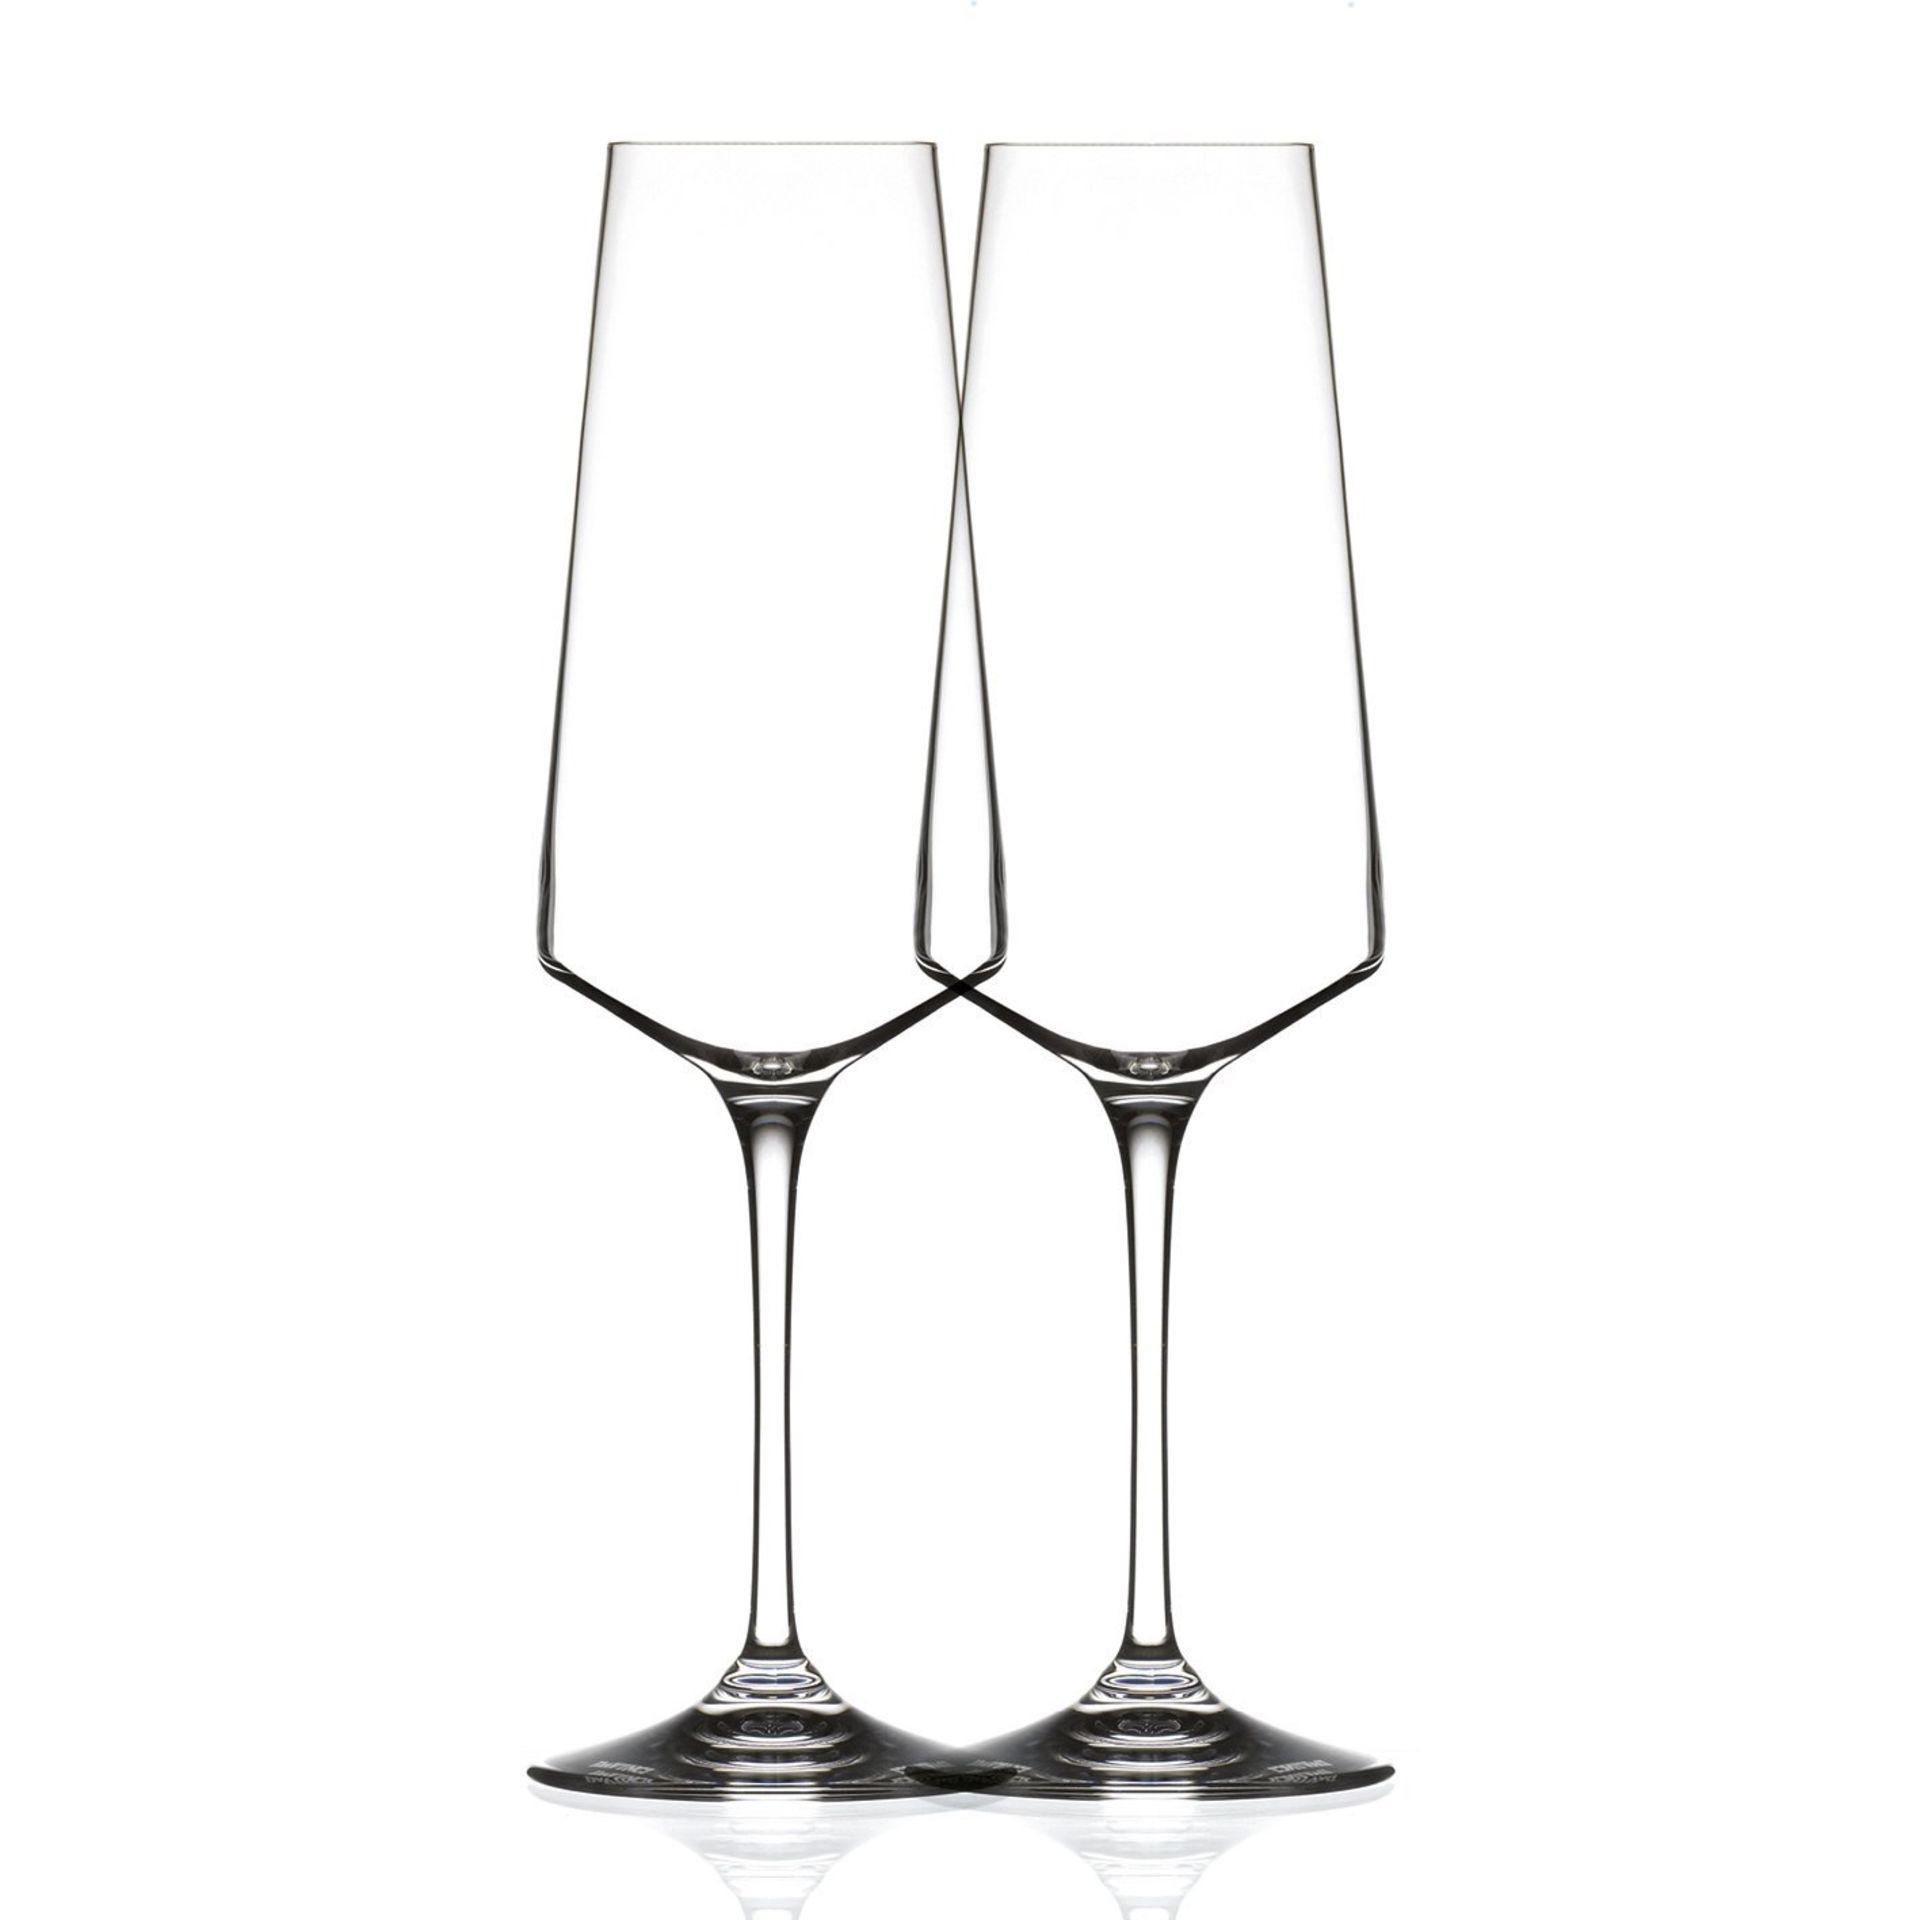 V Brand New Twin Pack of RCR Armonia Italian Crystal 35cl Champagne Flutes Amazon Price £29.99 X 6